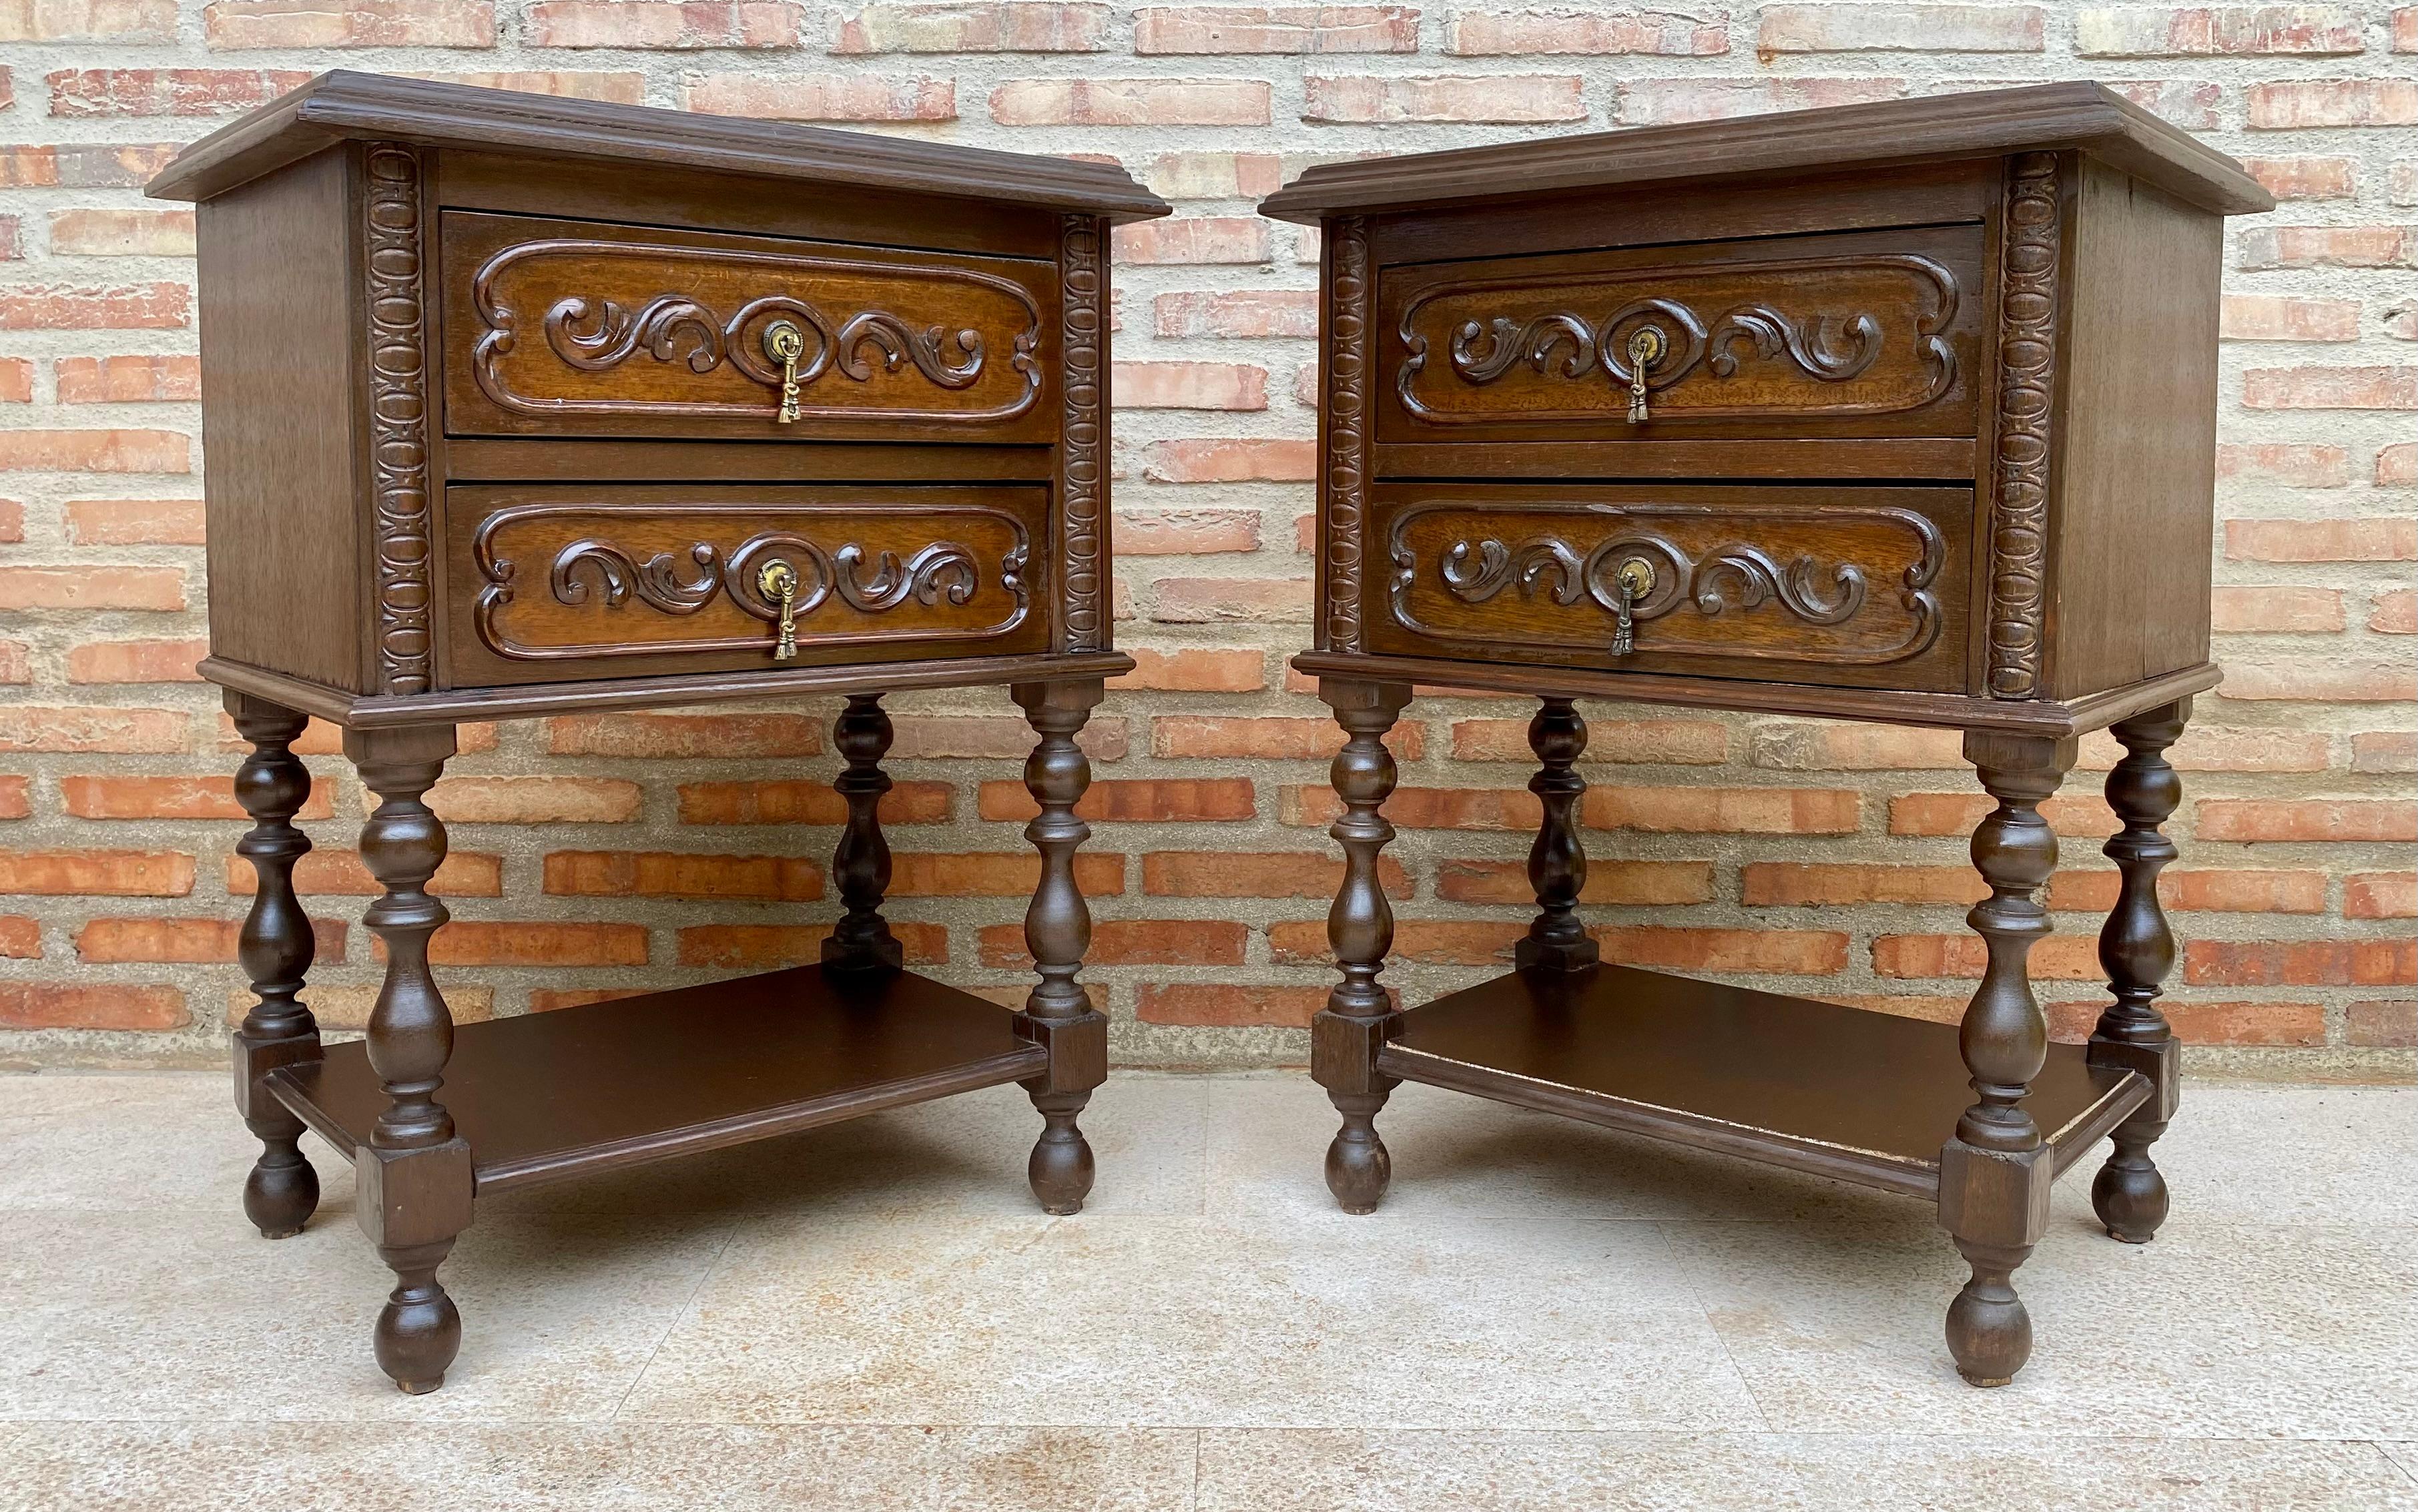 Spanish Colonial French Nightstands In Carved Walnut Two Drawers And Shelf, Set Of 2 For Sale